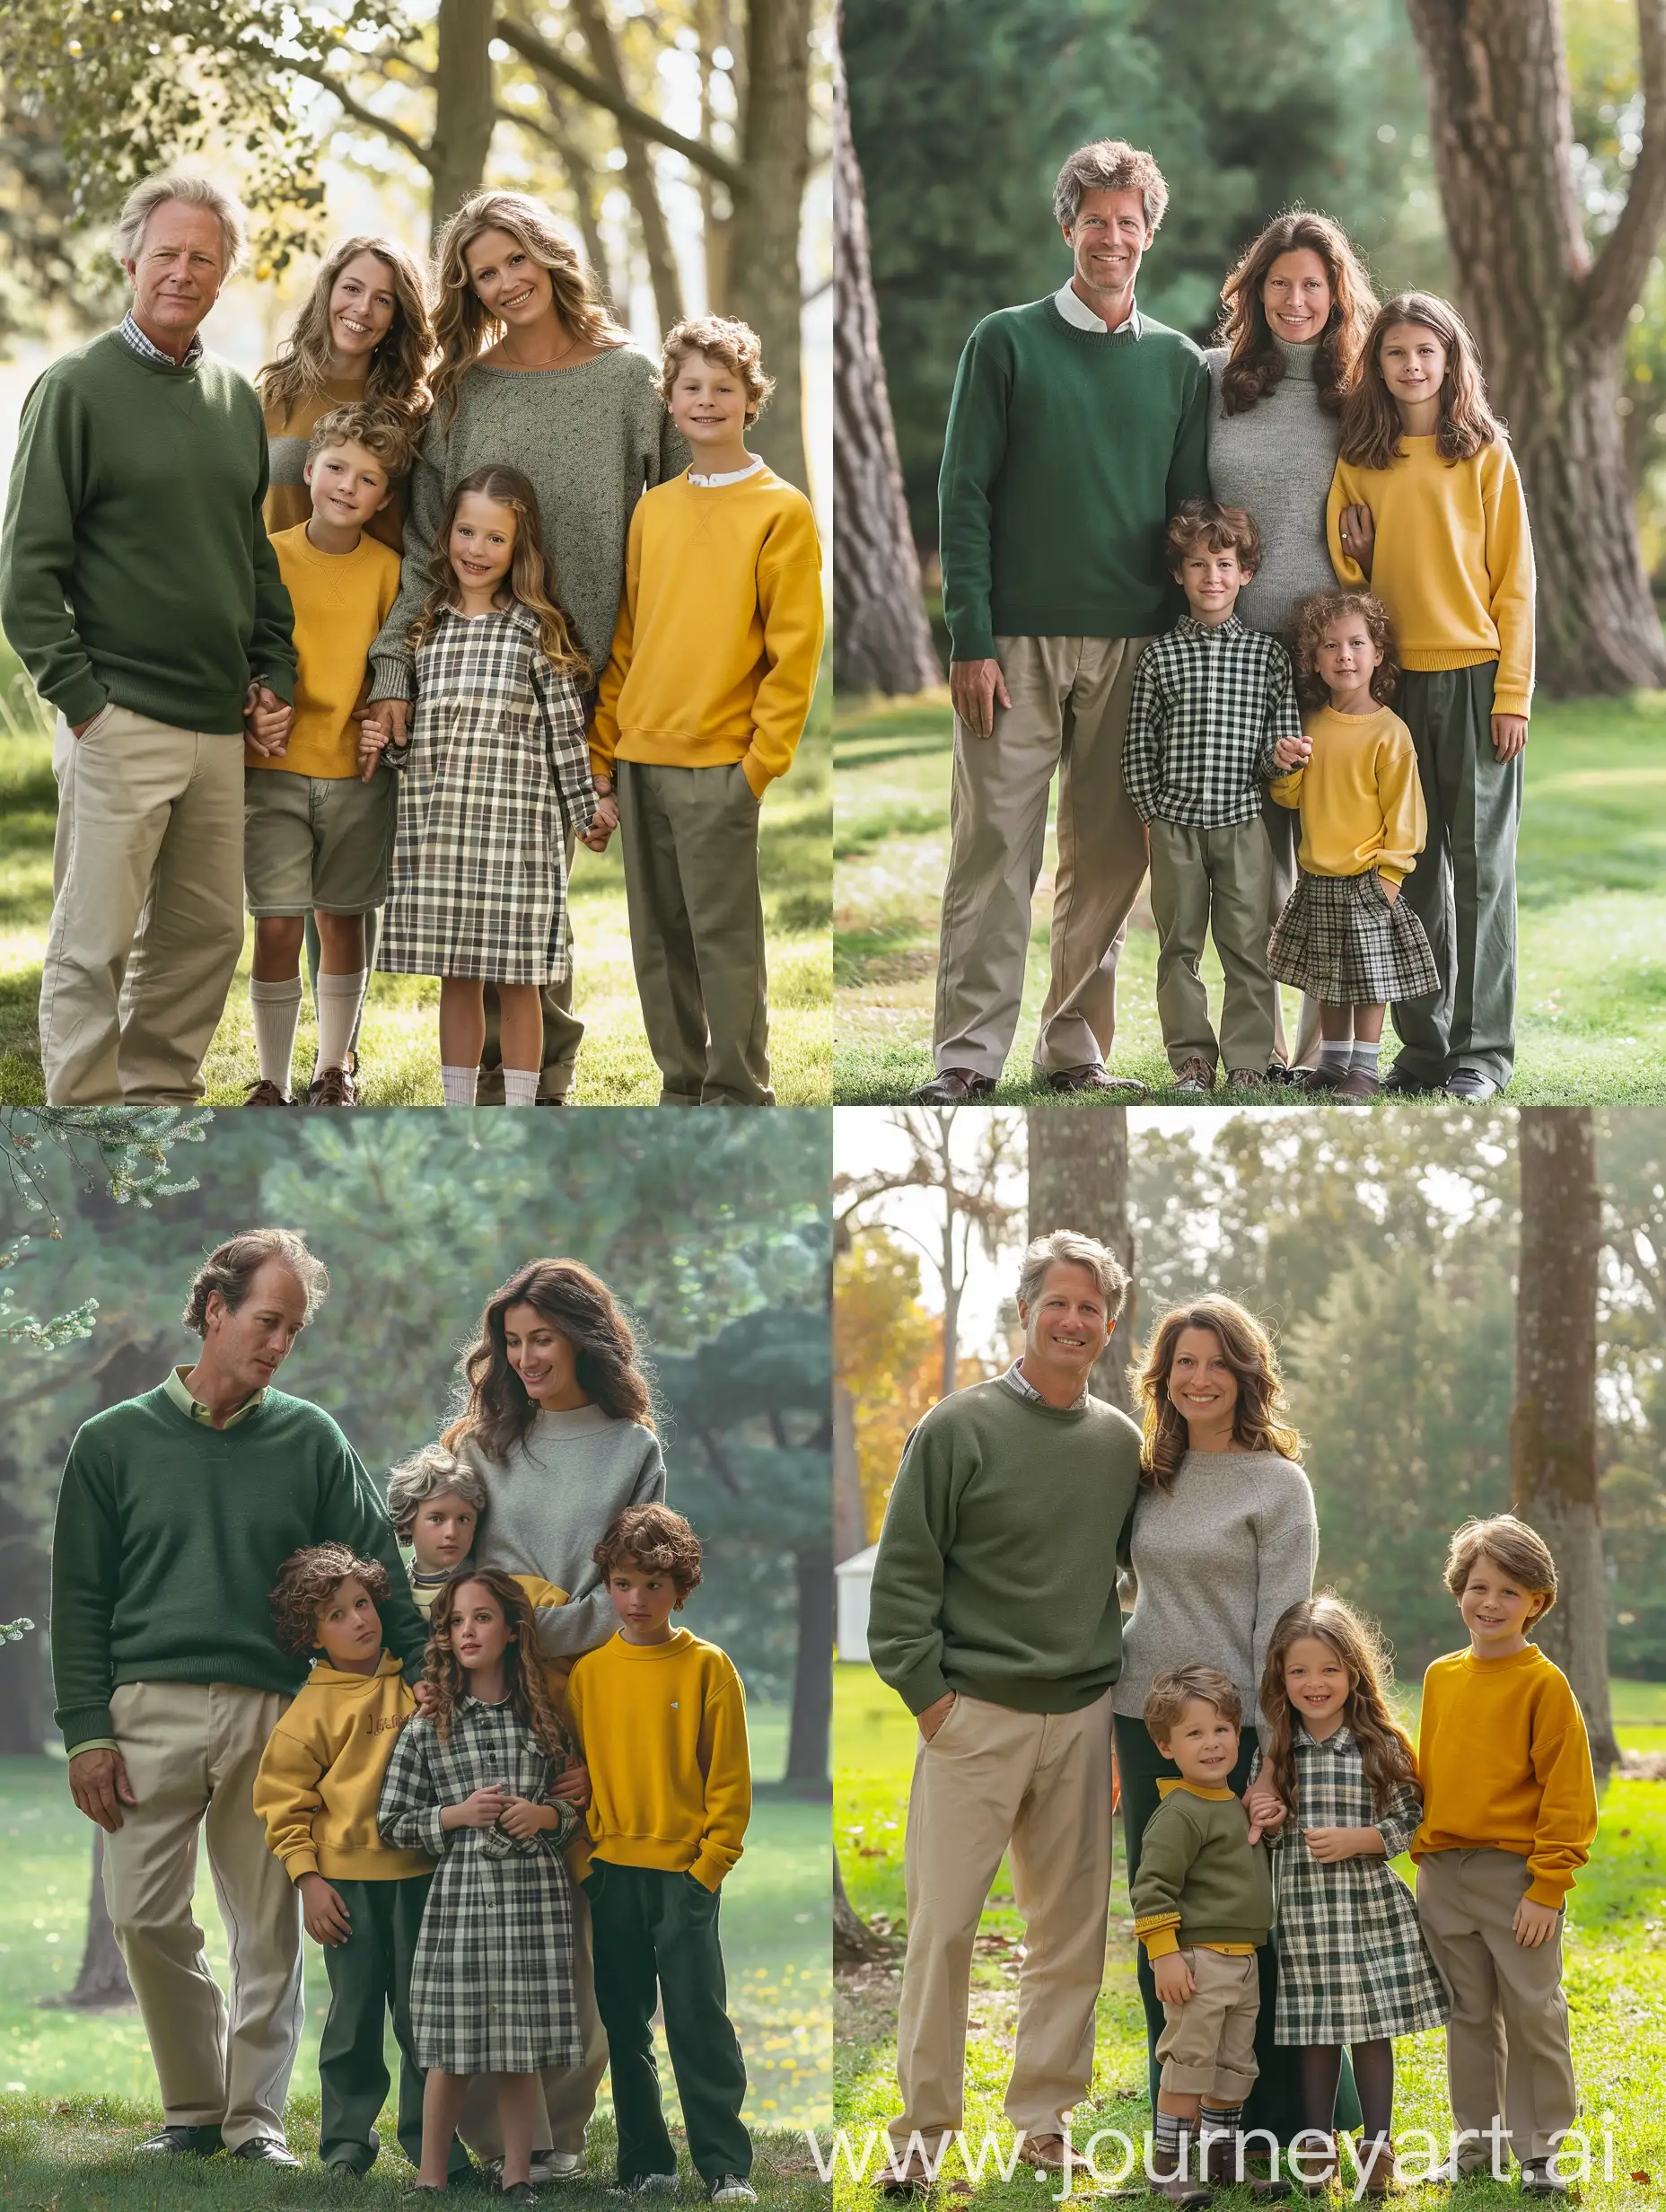 A colored family photo featuring a five-member family in a park. The father, dressed in a green sweater and khaki pants, stands on the left side of the image with his hand on the younger son's shoulder. The mother, with wavy hair and a gray sweater, stands beside the father with a warm smile on her face. The two younger sons, one in a yellow sweatshirt and the other in a checkered shirt, stand in front of the parents, holding each other's hands. The youngest daughter, with long hair and a checkered dress, stands in the center of the image, holding her brother's hand. Tall trees and green grass in the park provide a beautiful and serene background. The soft sunlight filtering through the trees adds a warm and pleasant touch to the picture. This photo beautifully captures the sense of closeness, affection, and family joy. High resolution, highly detailed, detailed facial features: 5, beautiful, photographed by Steve McCurry, DSLR camera, 55MM lens, realistic photography, vibrant colors, 3:4, V6.